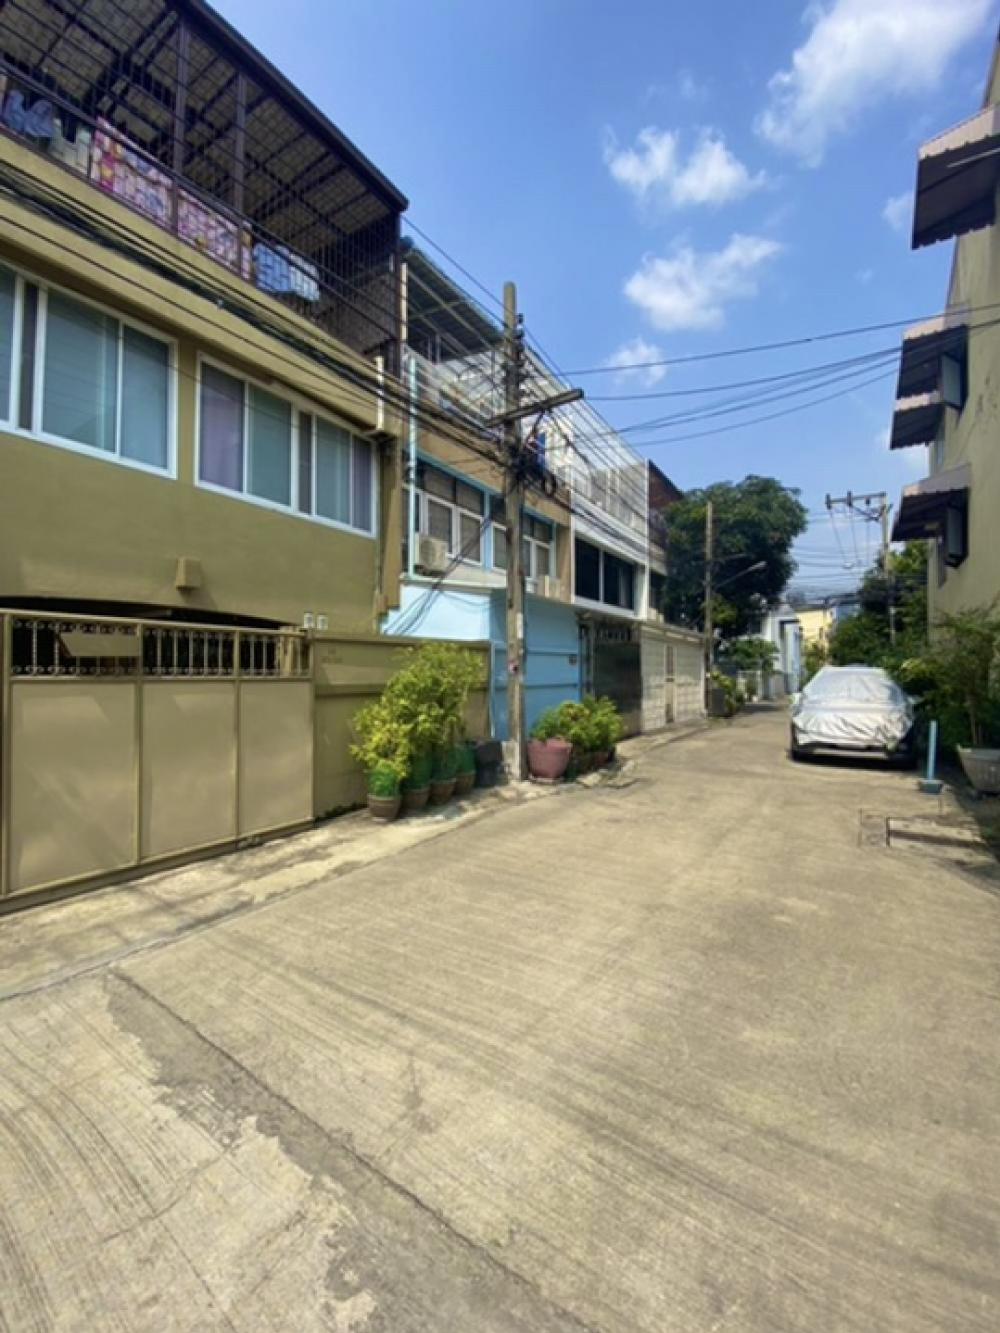 For RentHouseSathorn, Narathiwat : 🪭House for rent in Sathorn District, Yenchit, St. Louis 🪭 🚘🚖🚘Just the parking is worth it, can park 3 cars, very good price, very convenient, near Mahanakhon Building✔️6 bedrooms, 2 bathrooms, has a rooftop, usable area 130 sq m, Soi Yenjit. Ready to move